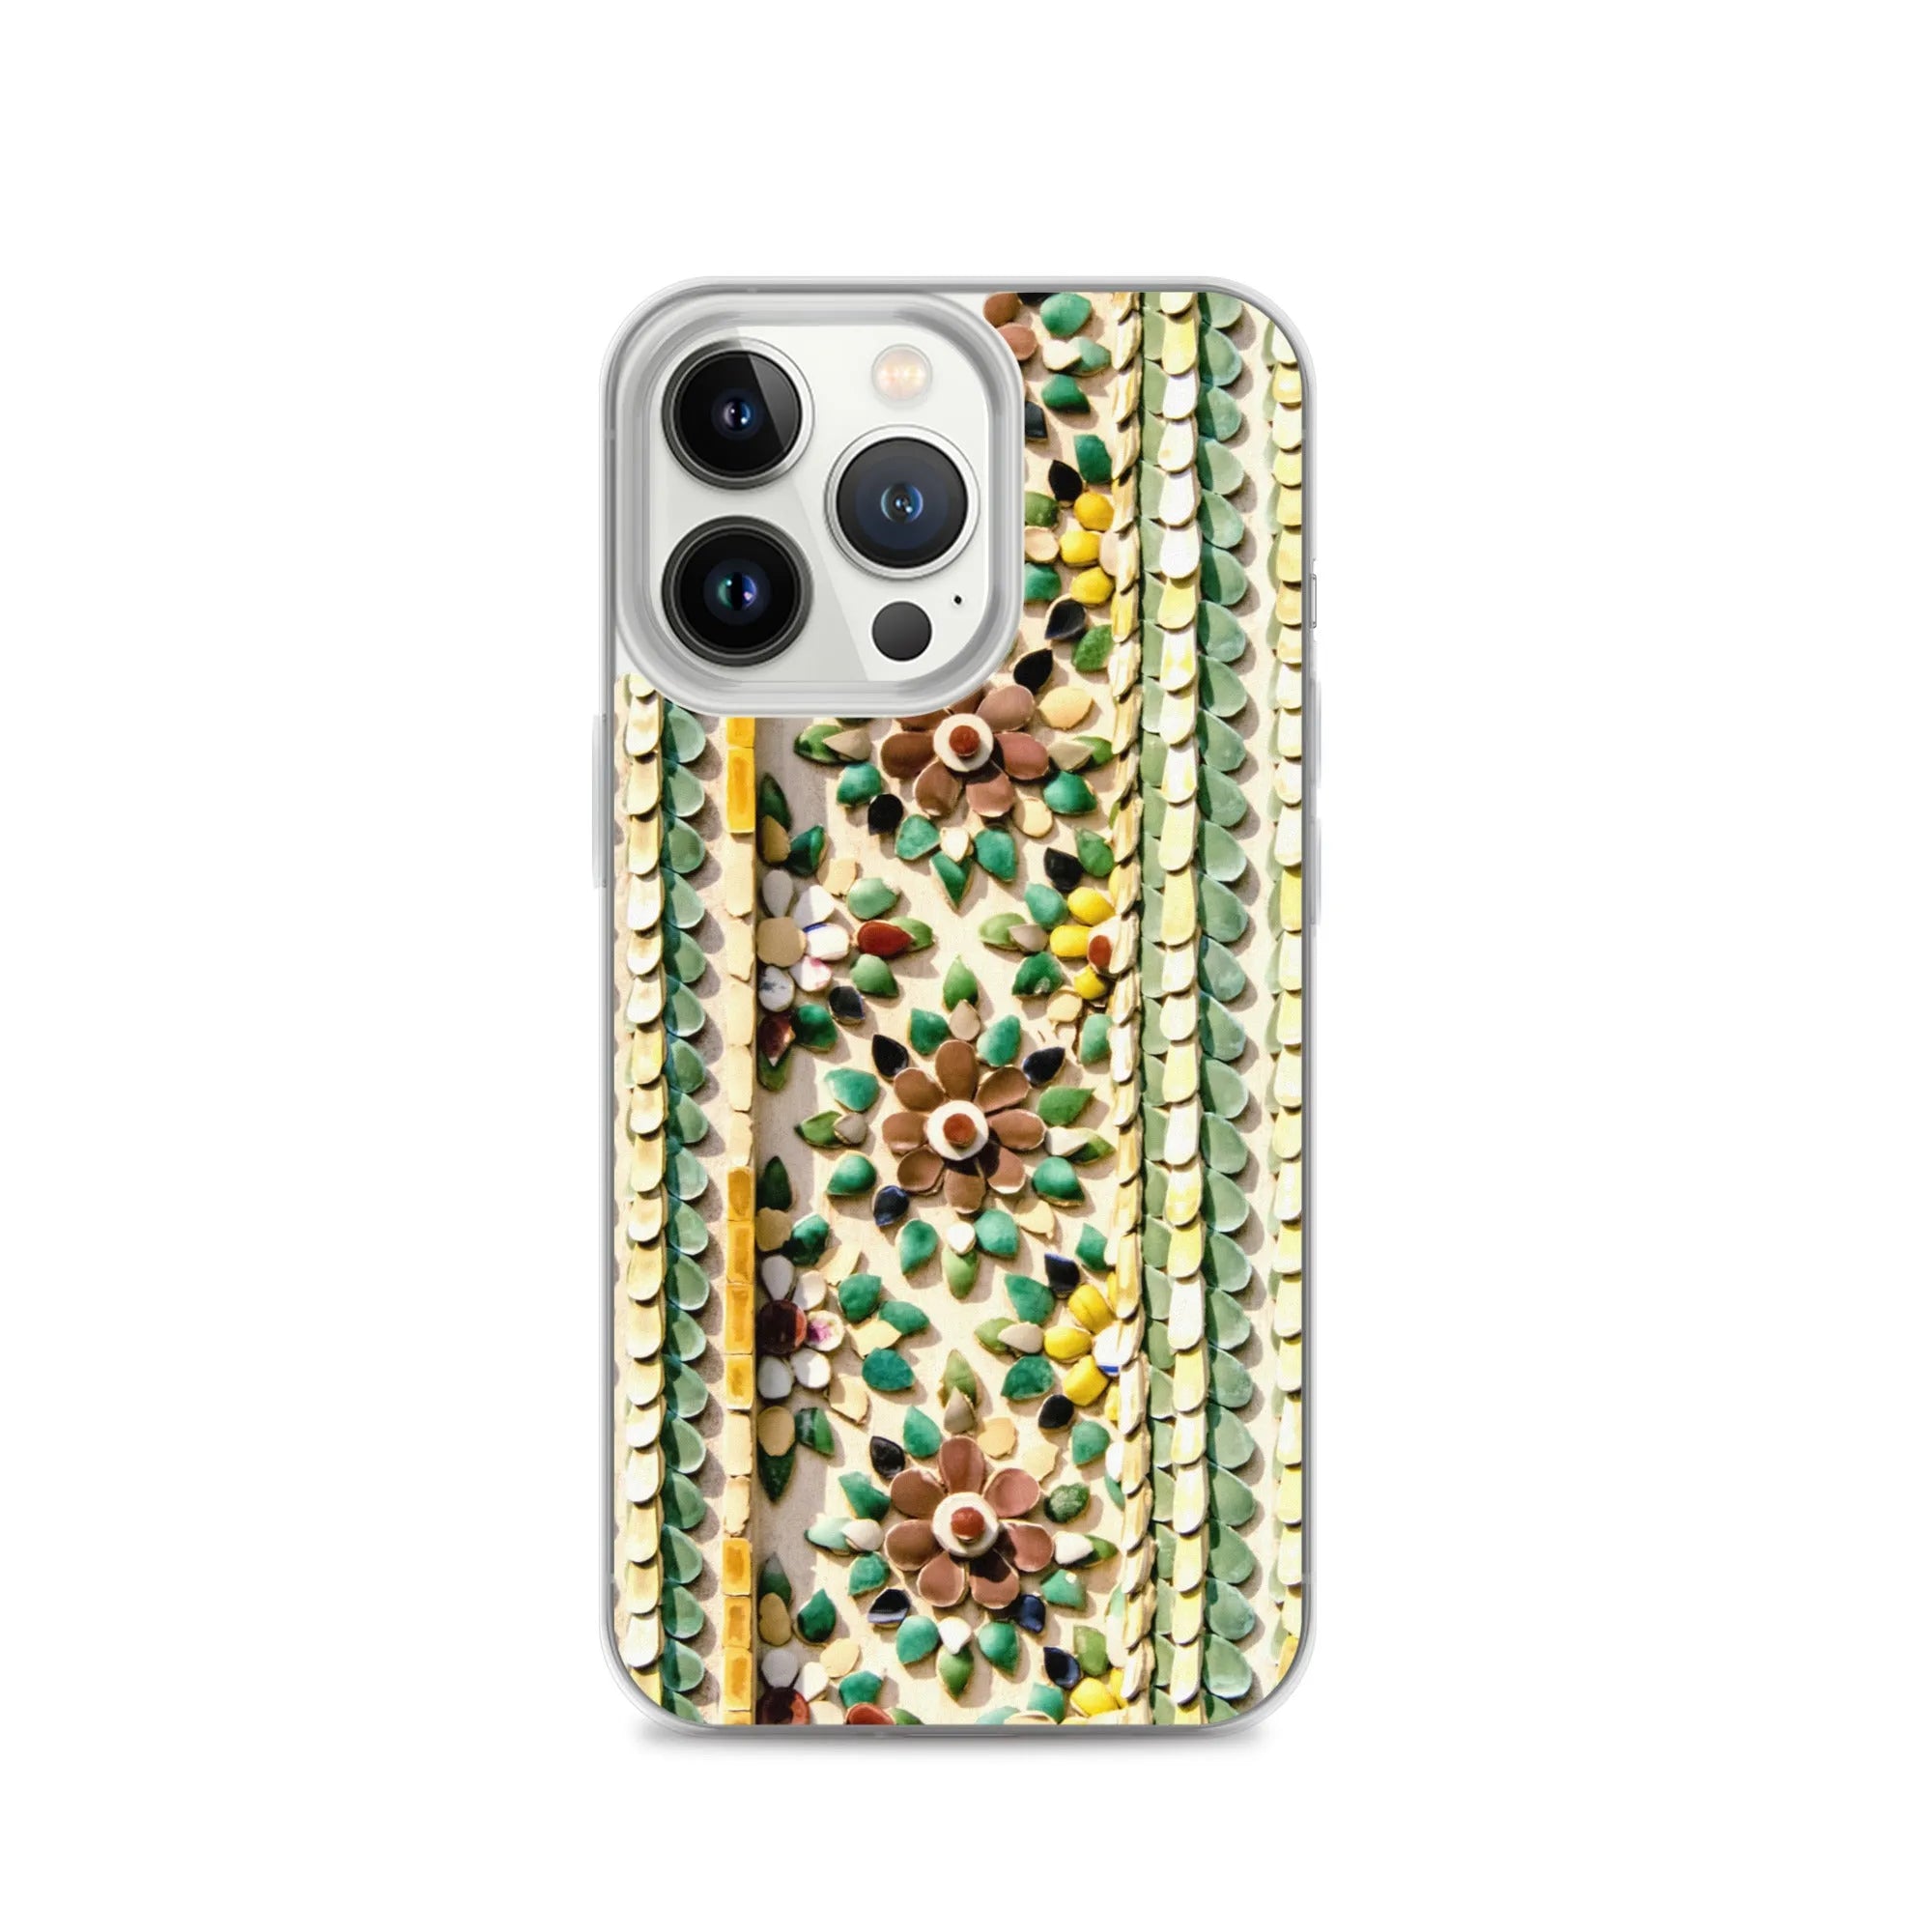 Flower Beds Pattern Iphone Case - Iphone 13 Pro - Mobile Phone Cases - Aesthetic Art